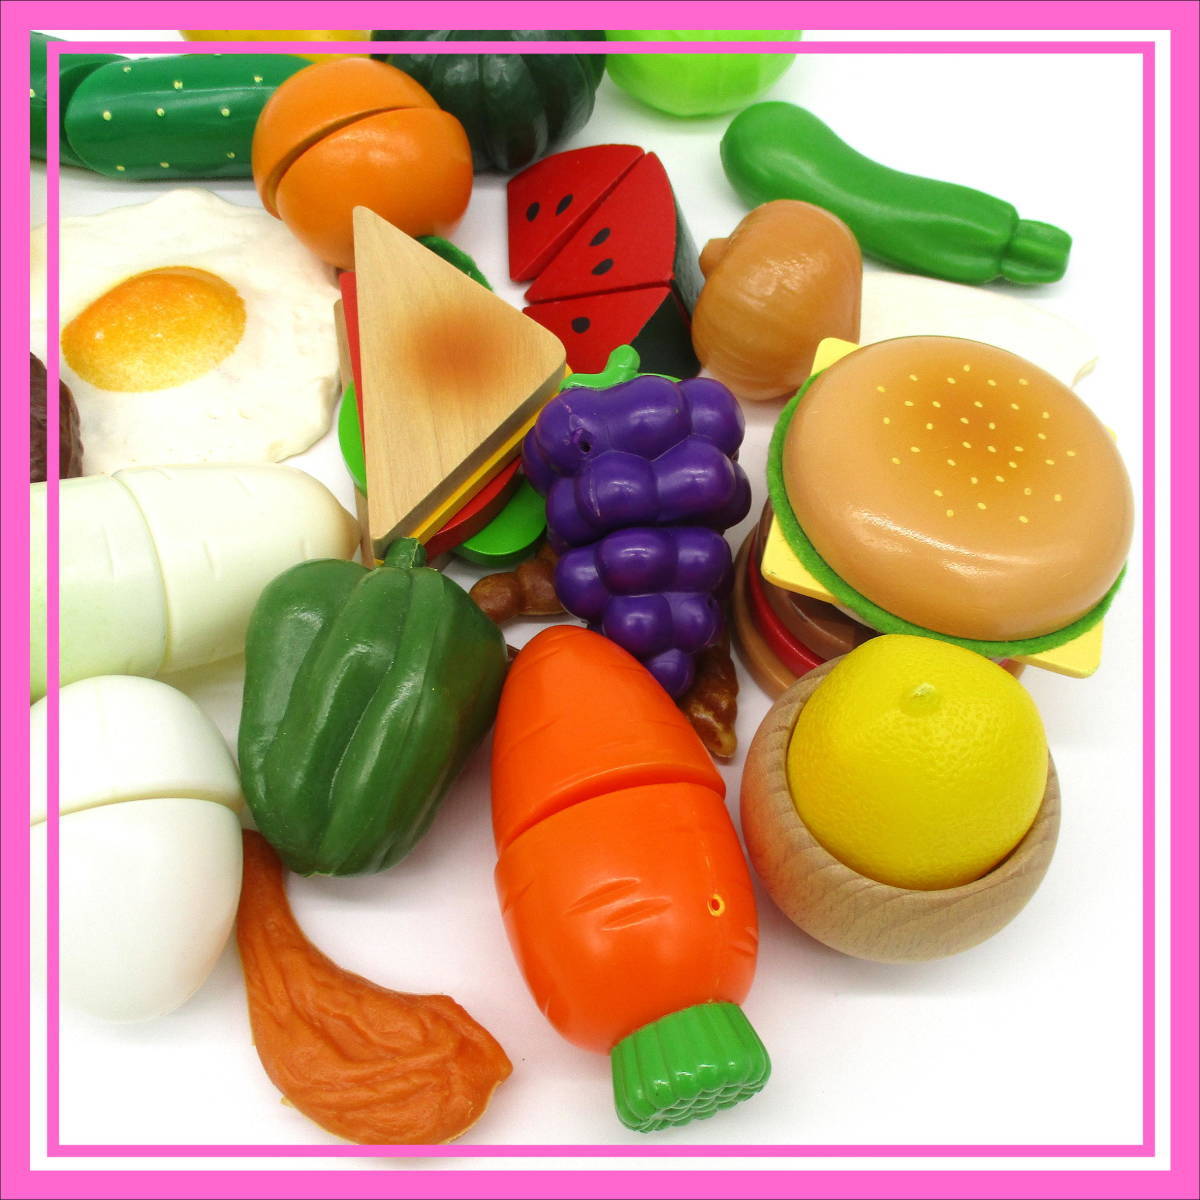  toy playing house food ingredients vegetable .. thing handle burger other summarize | 30 piece Used